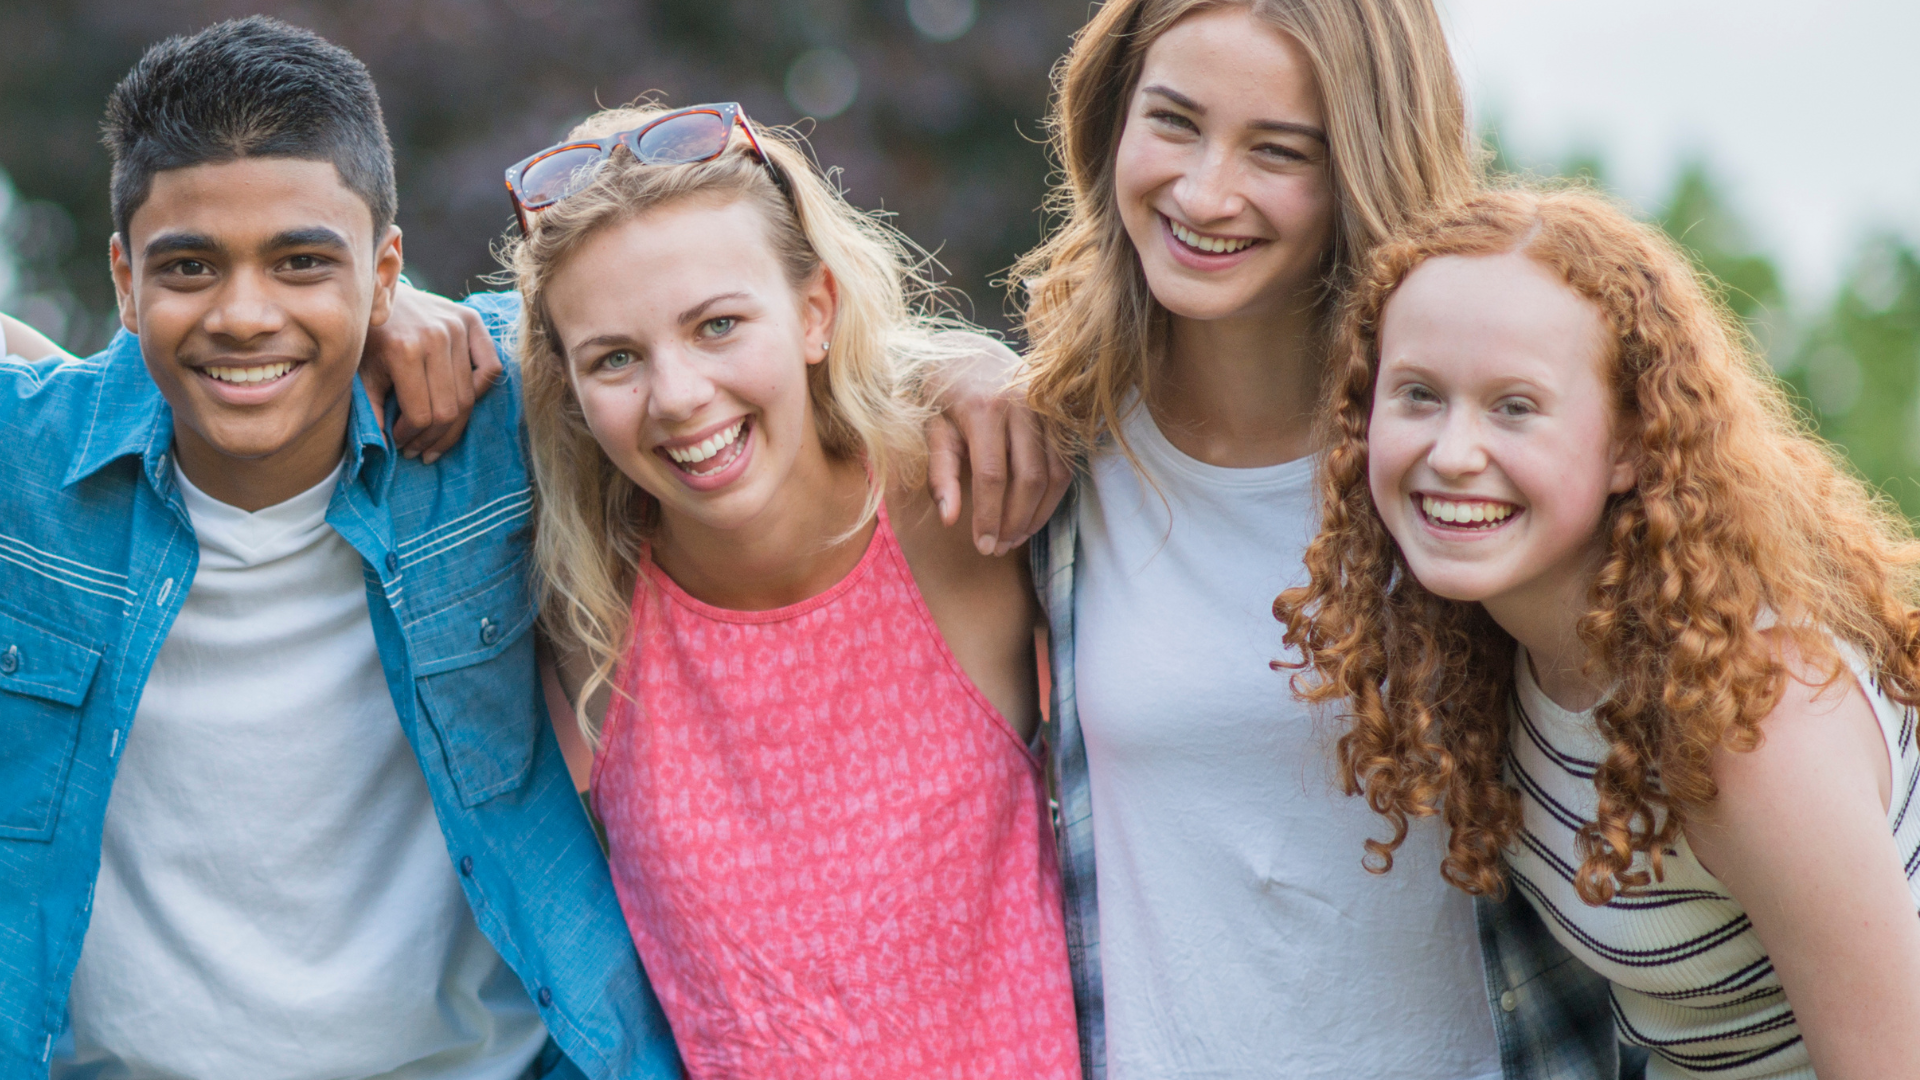 7 Confidence Tips If You’re the Only Redhead in Your Class or Group of Friends